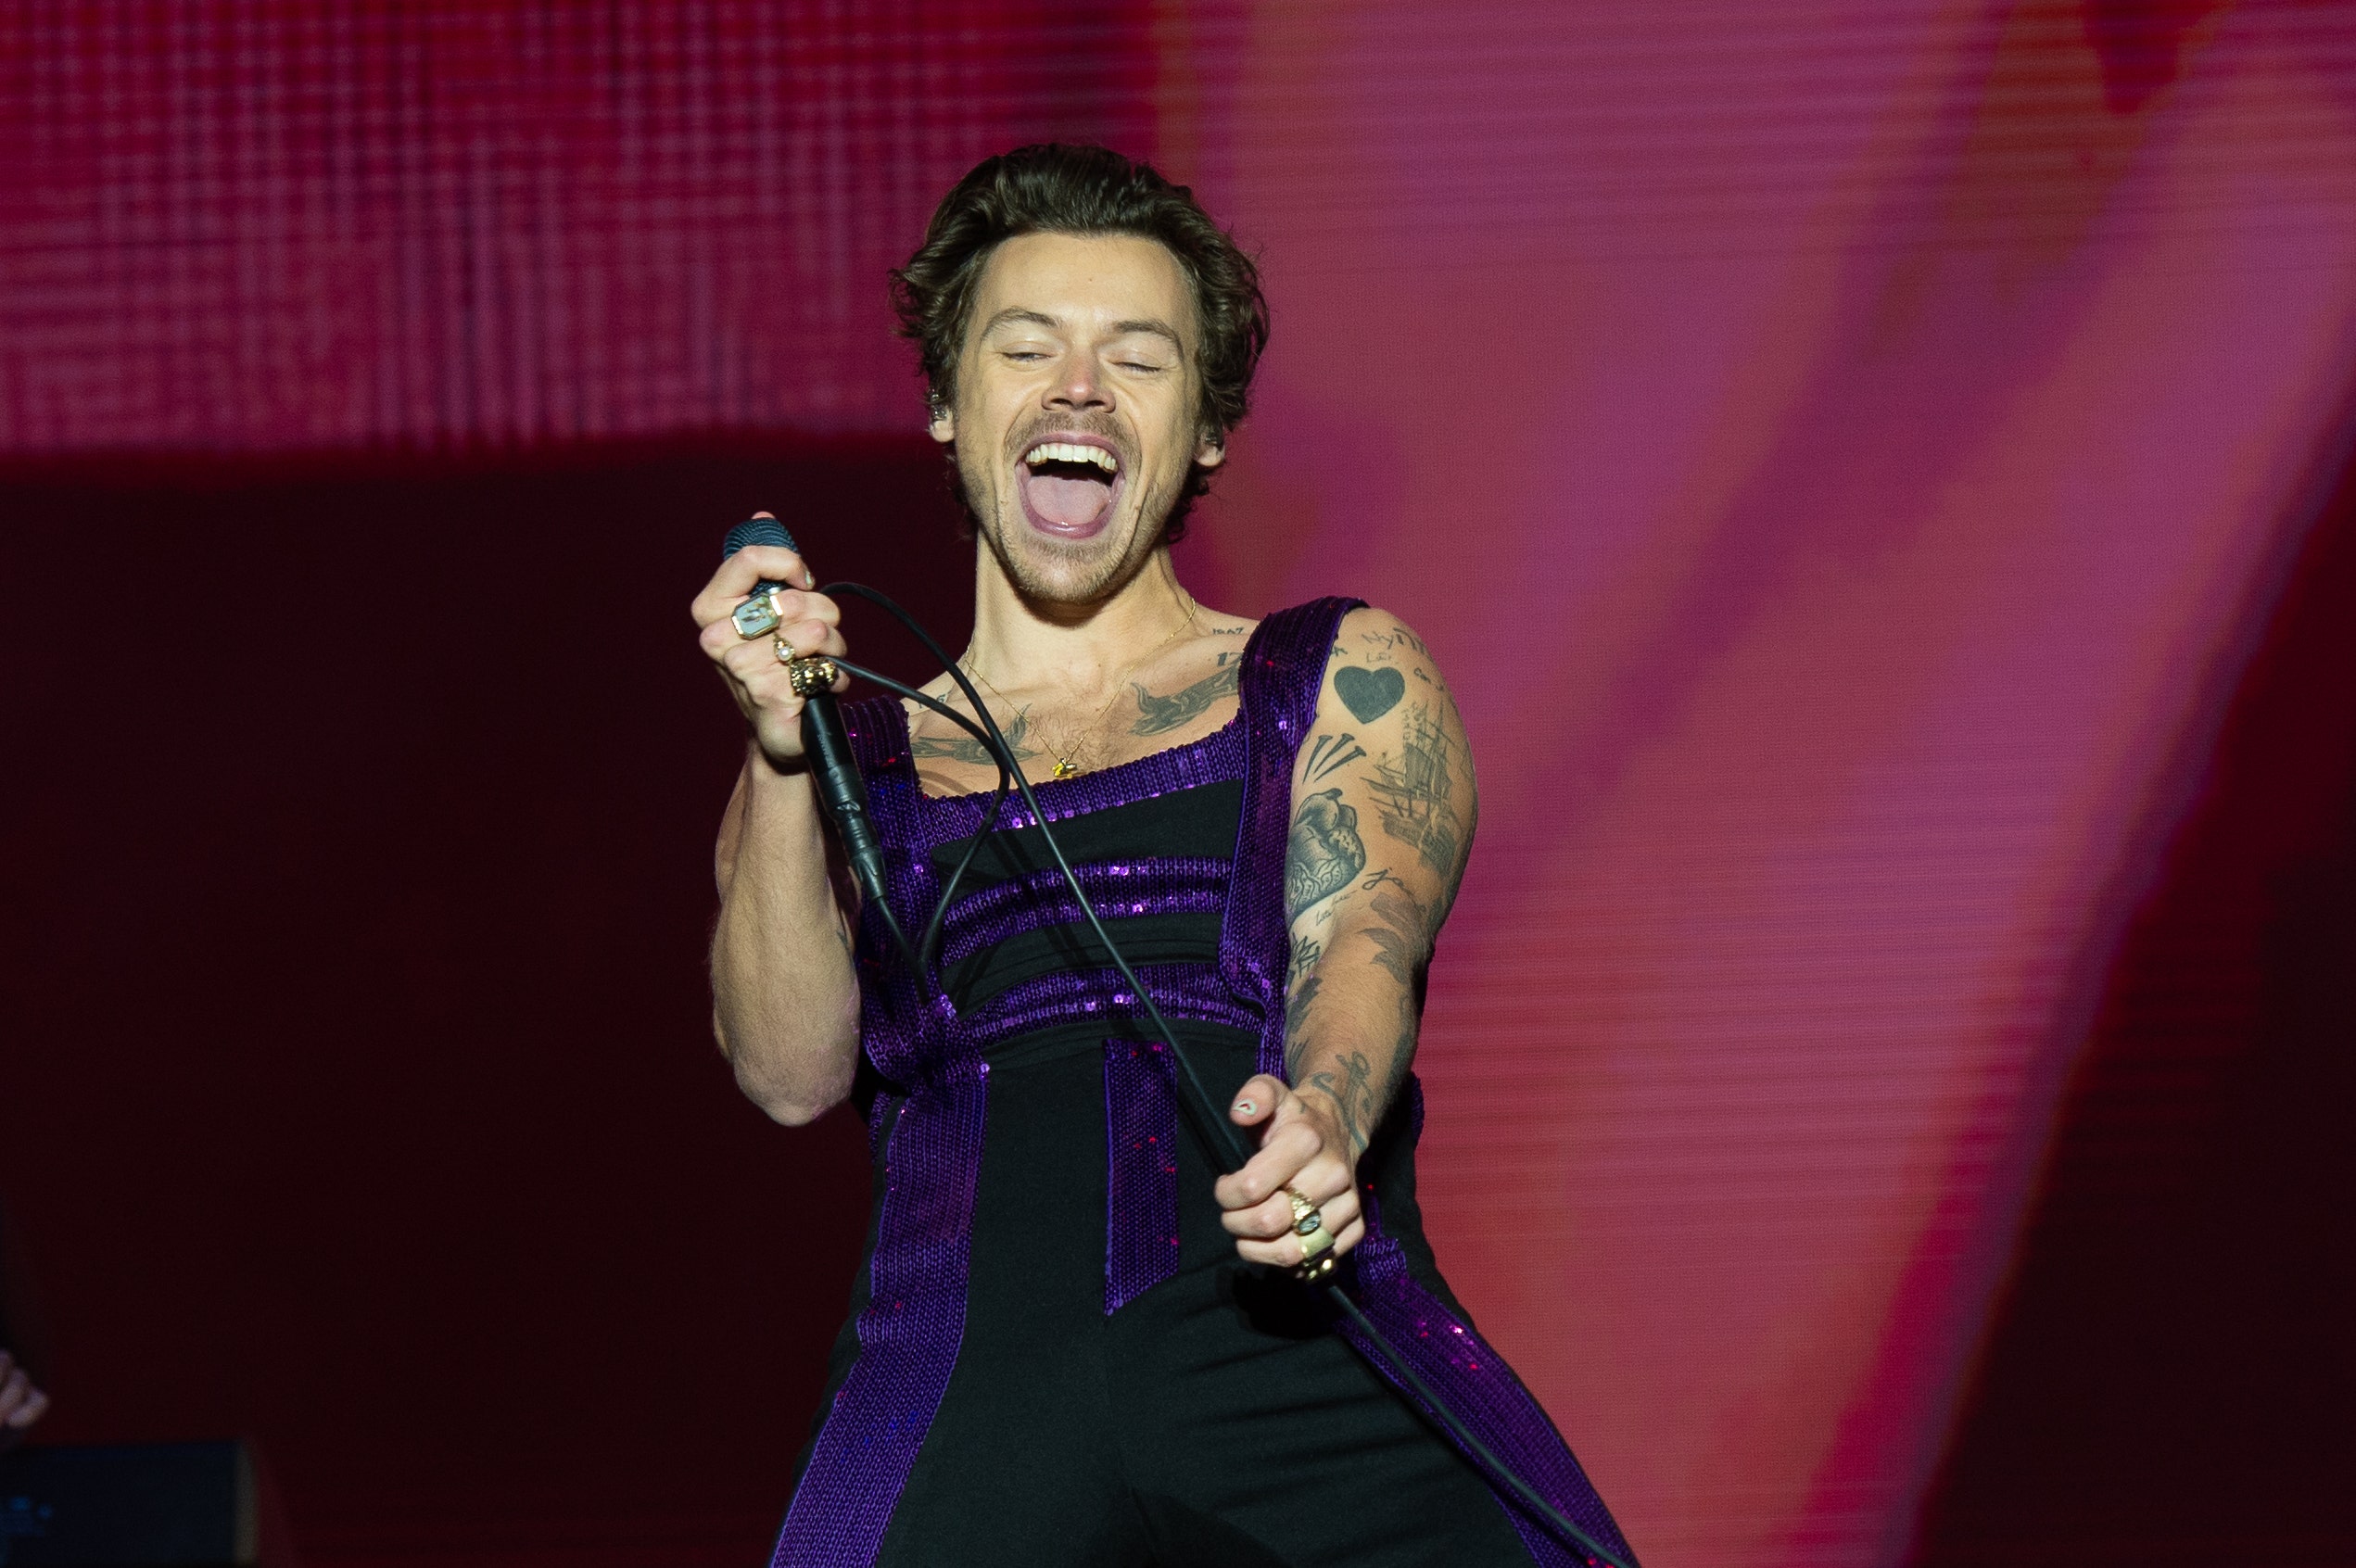 Harry Styles jokes he went to Venice 'to spit on Chris Pine' during New York City concert